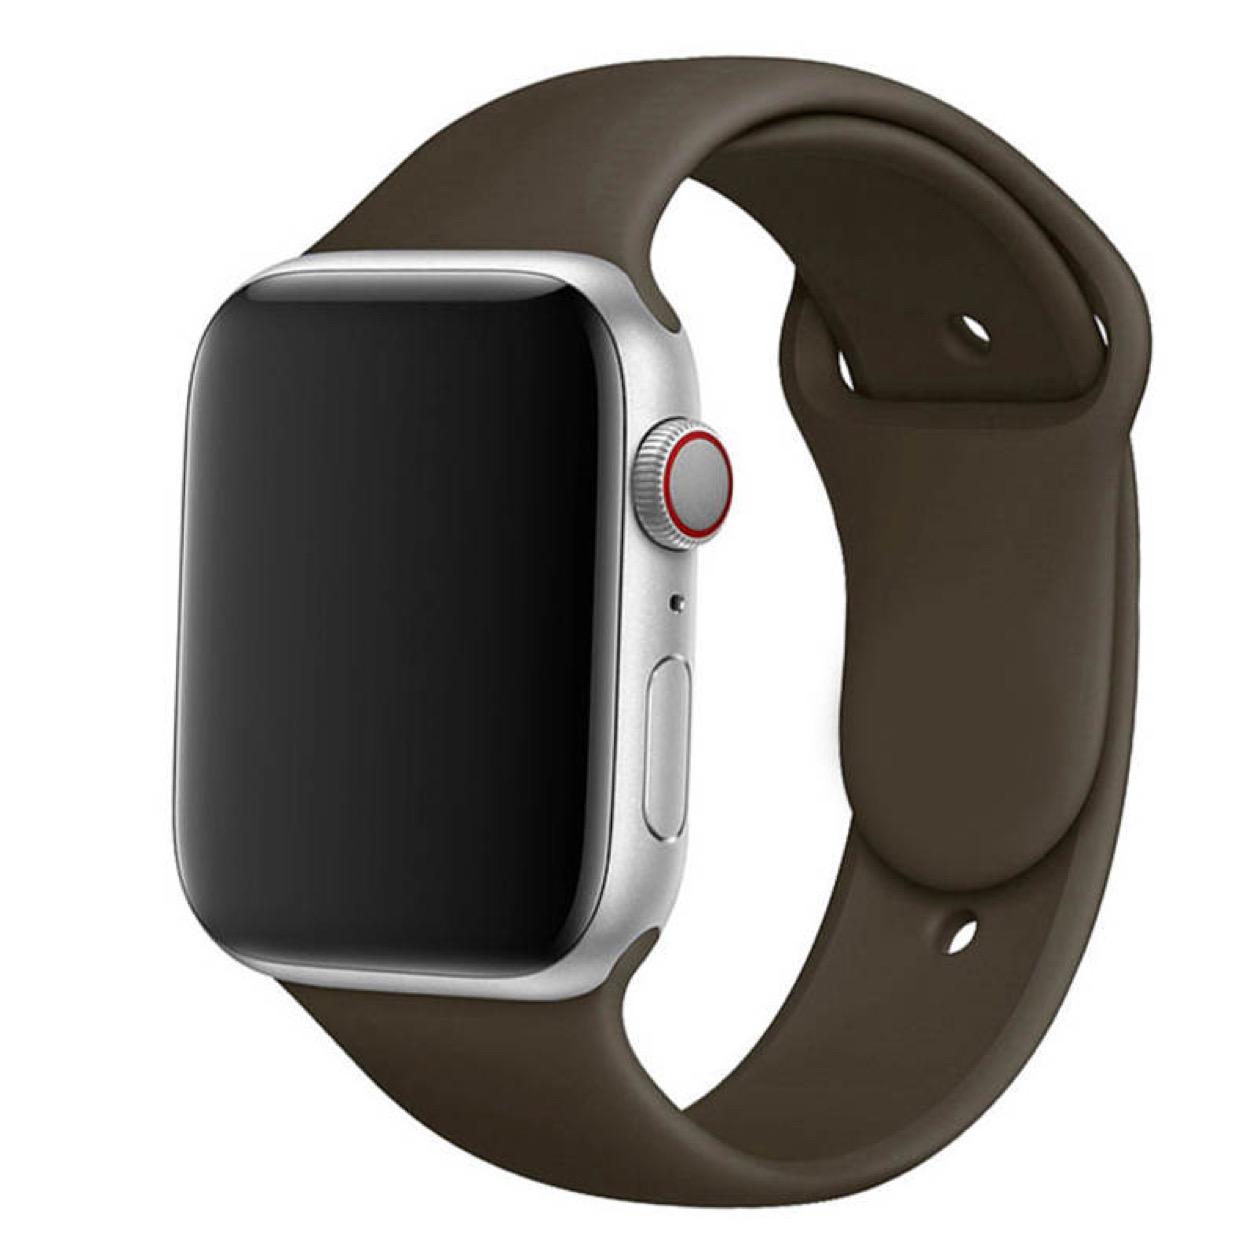 Cocoa Brown Apple Watch Strap - thefonecasecompany